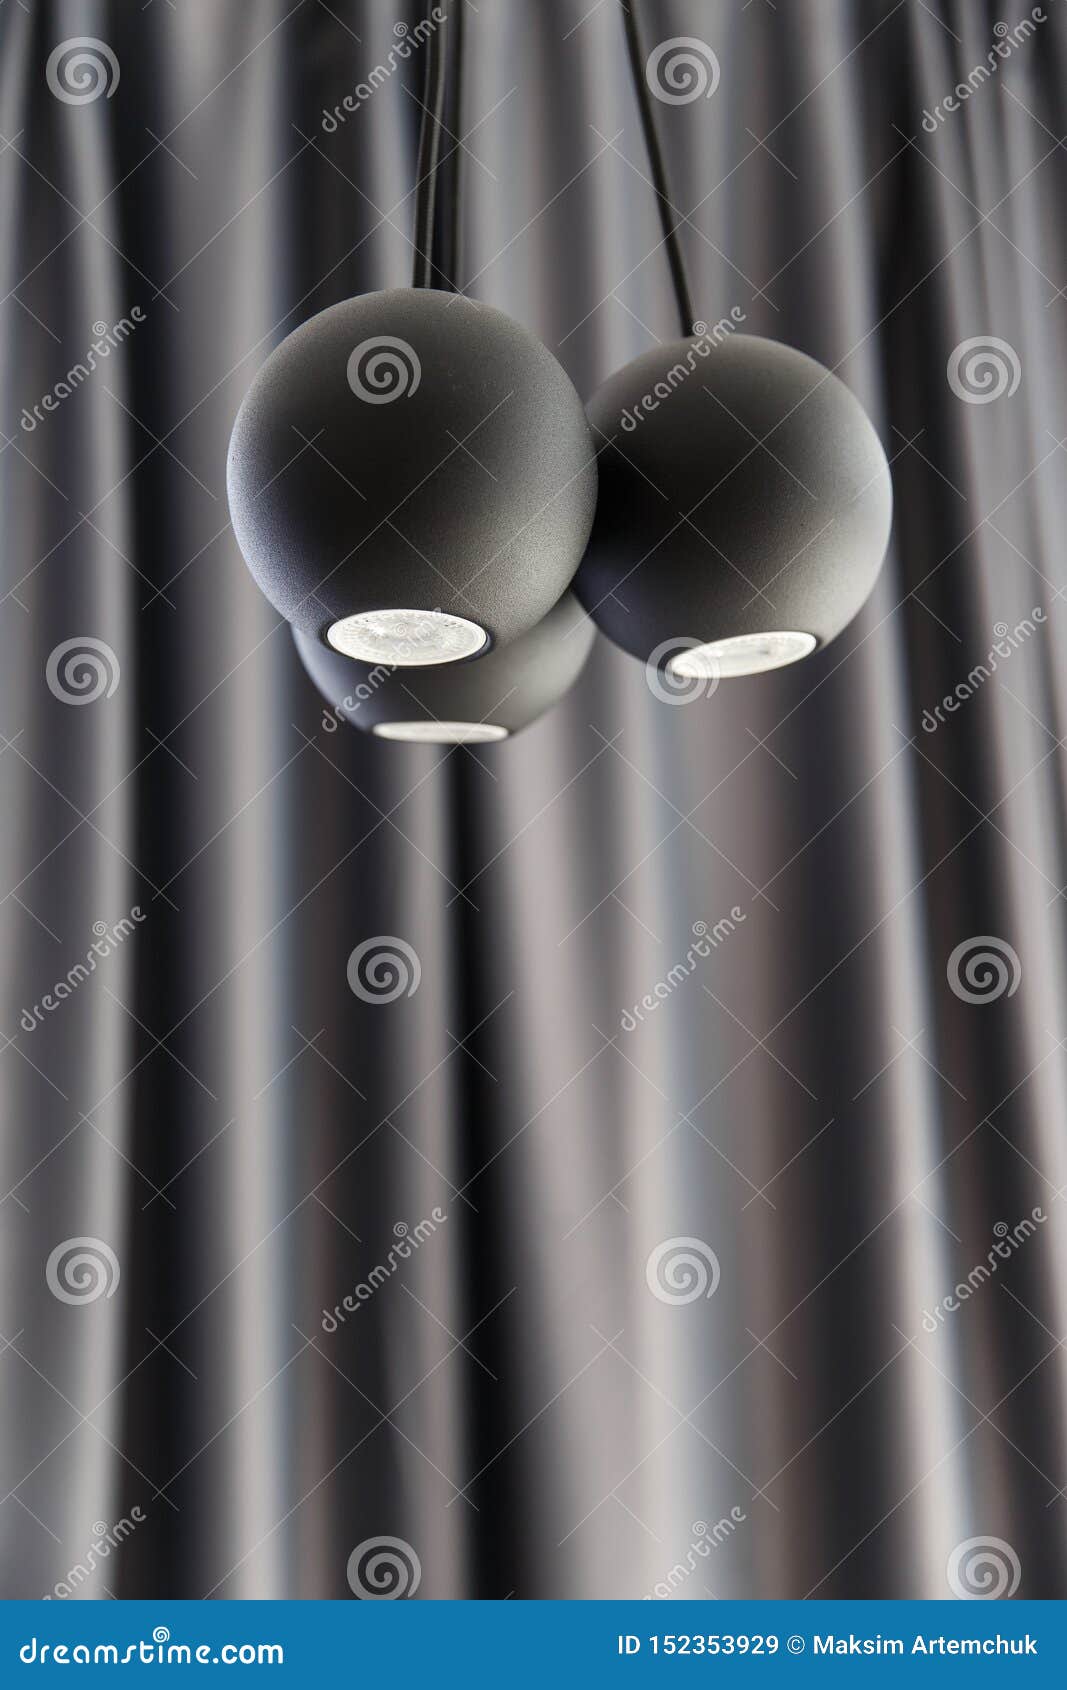 three ball d led illuminators are hanging from the ceiling. black curtain on the backround